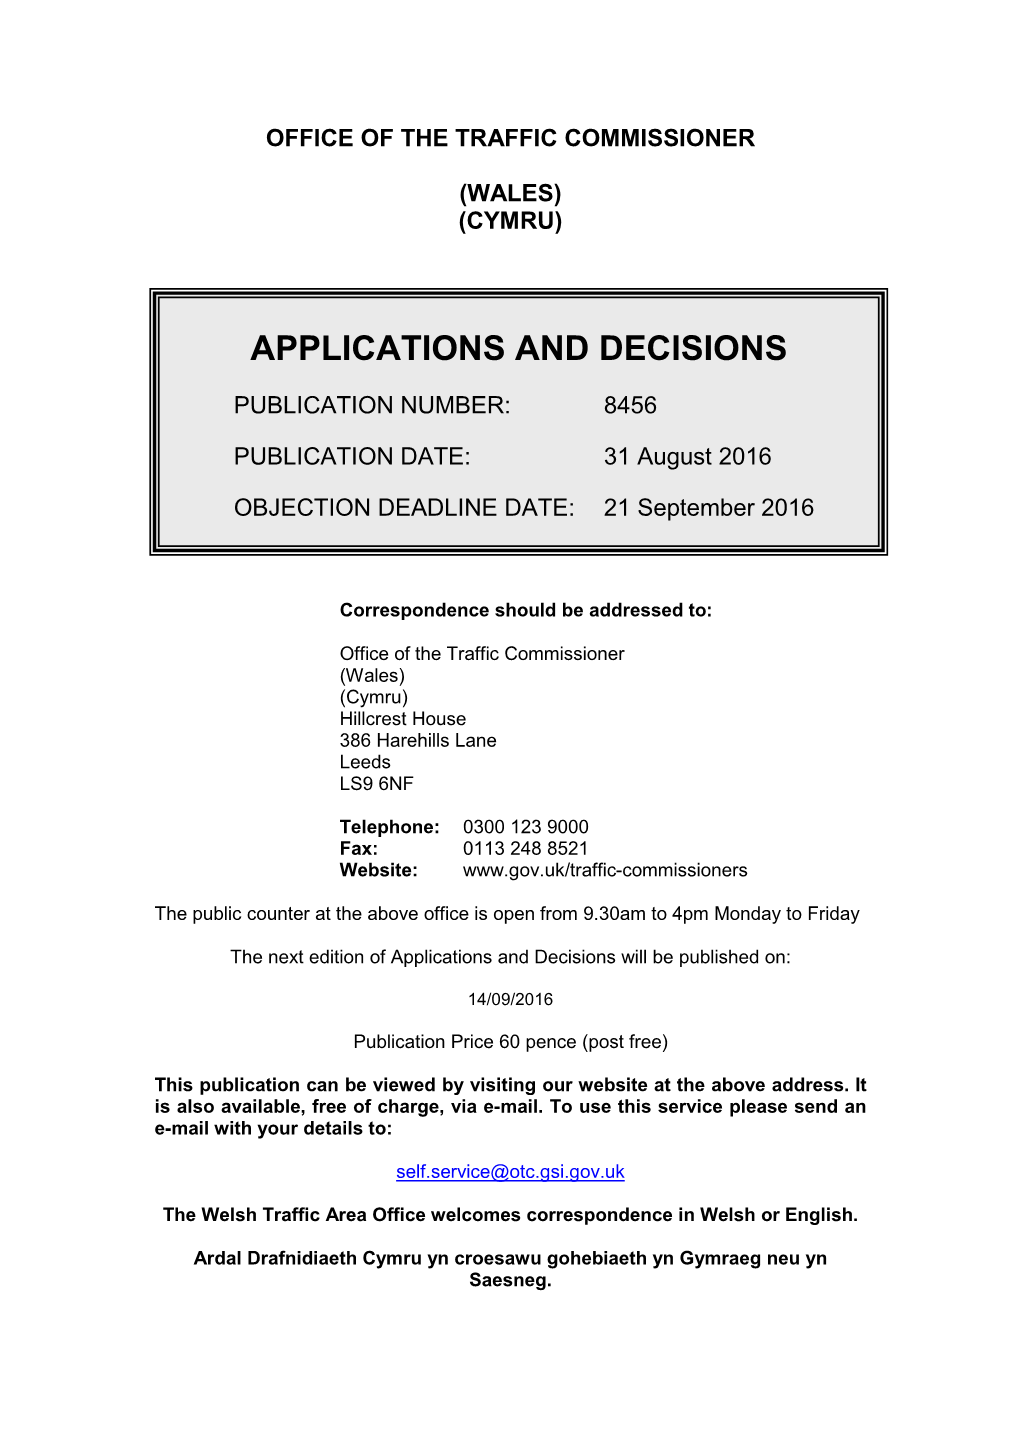 Applications and Decisions Wales August 31 2016